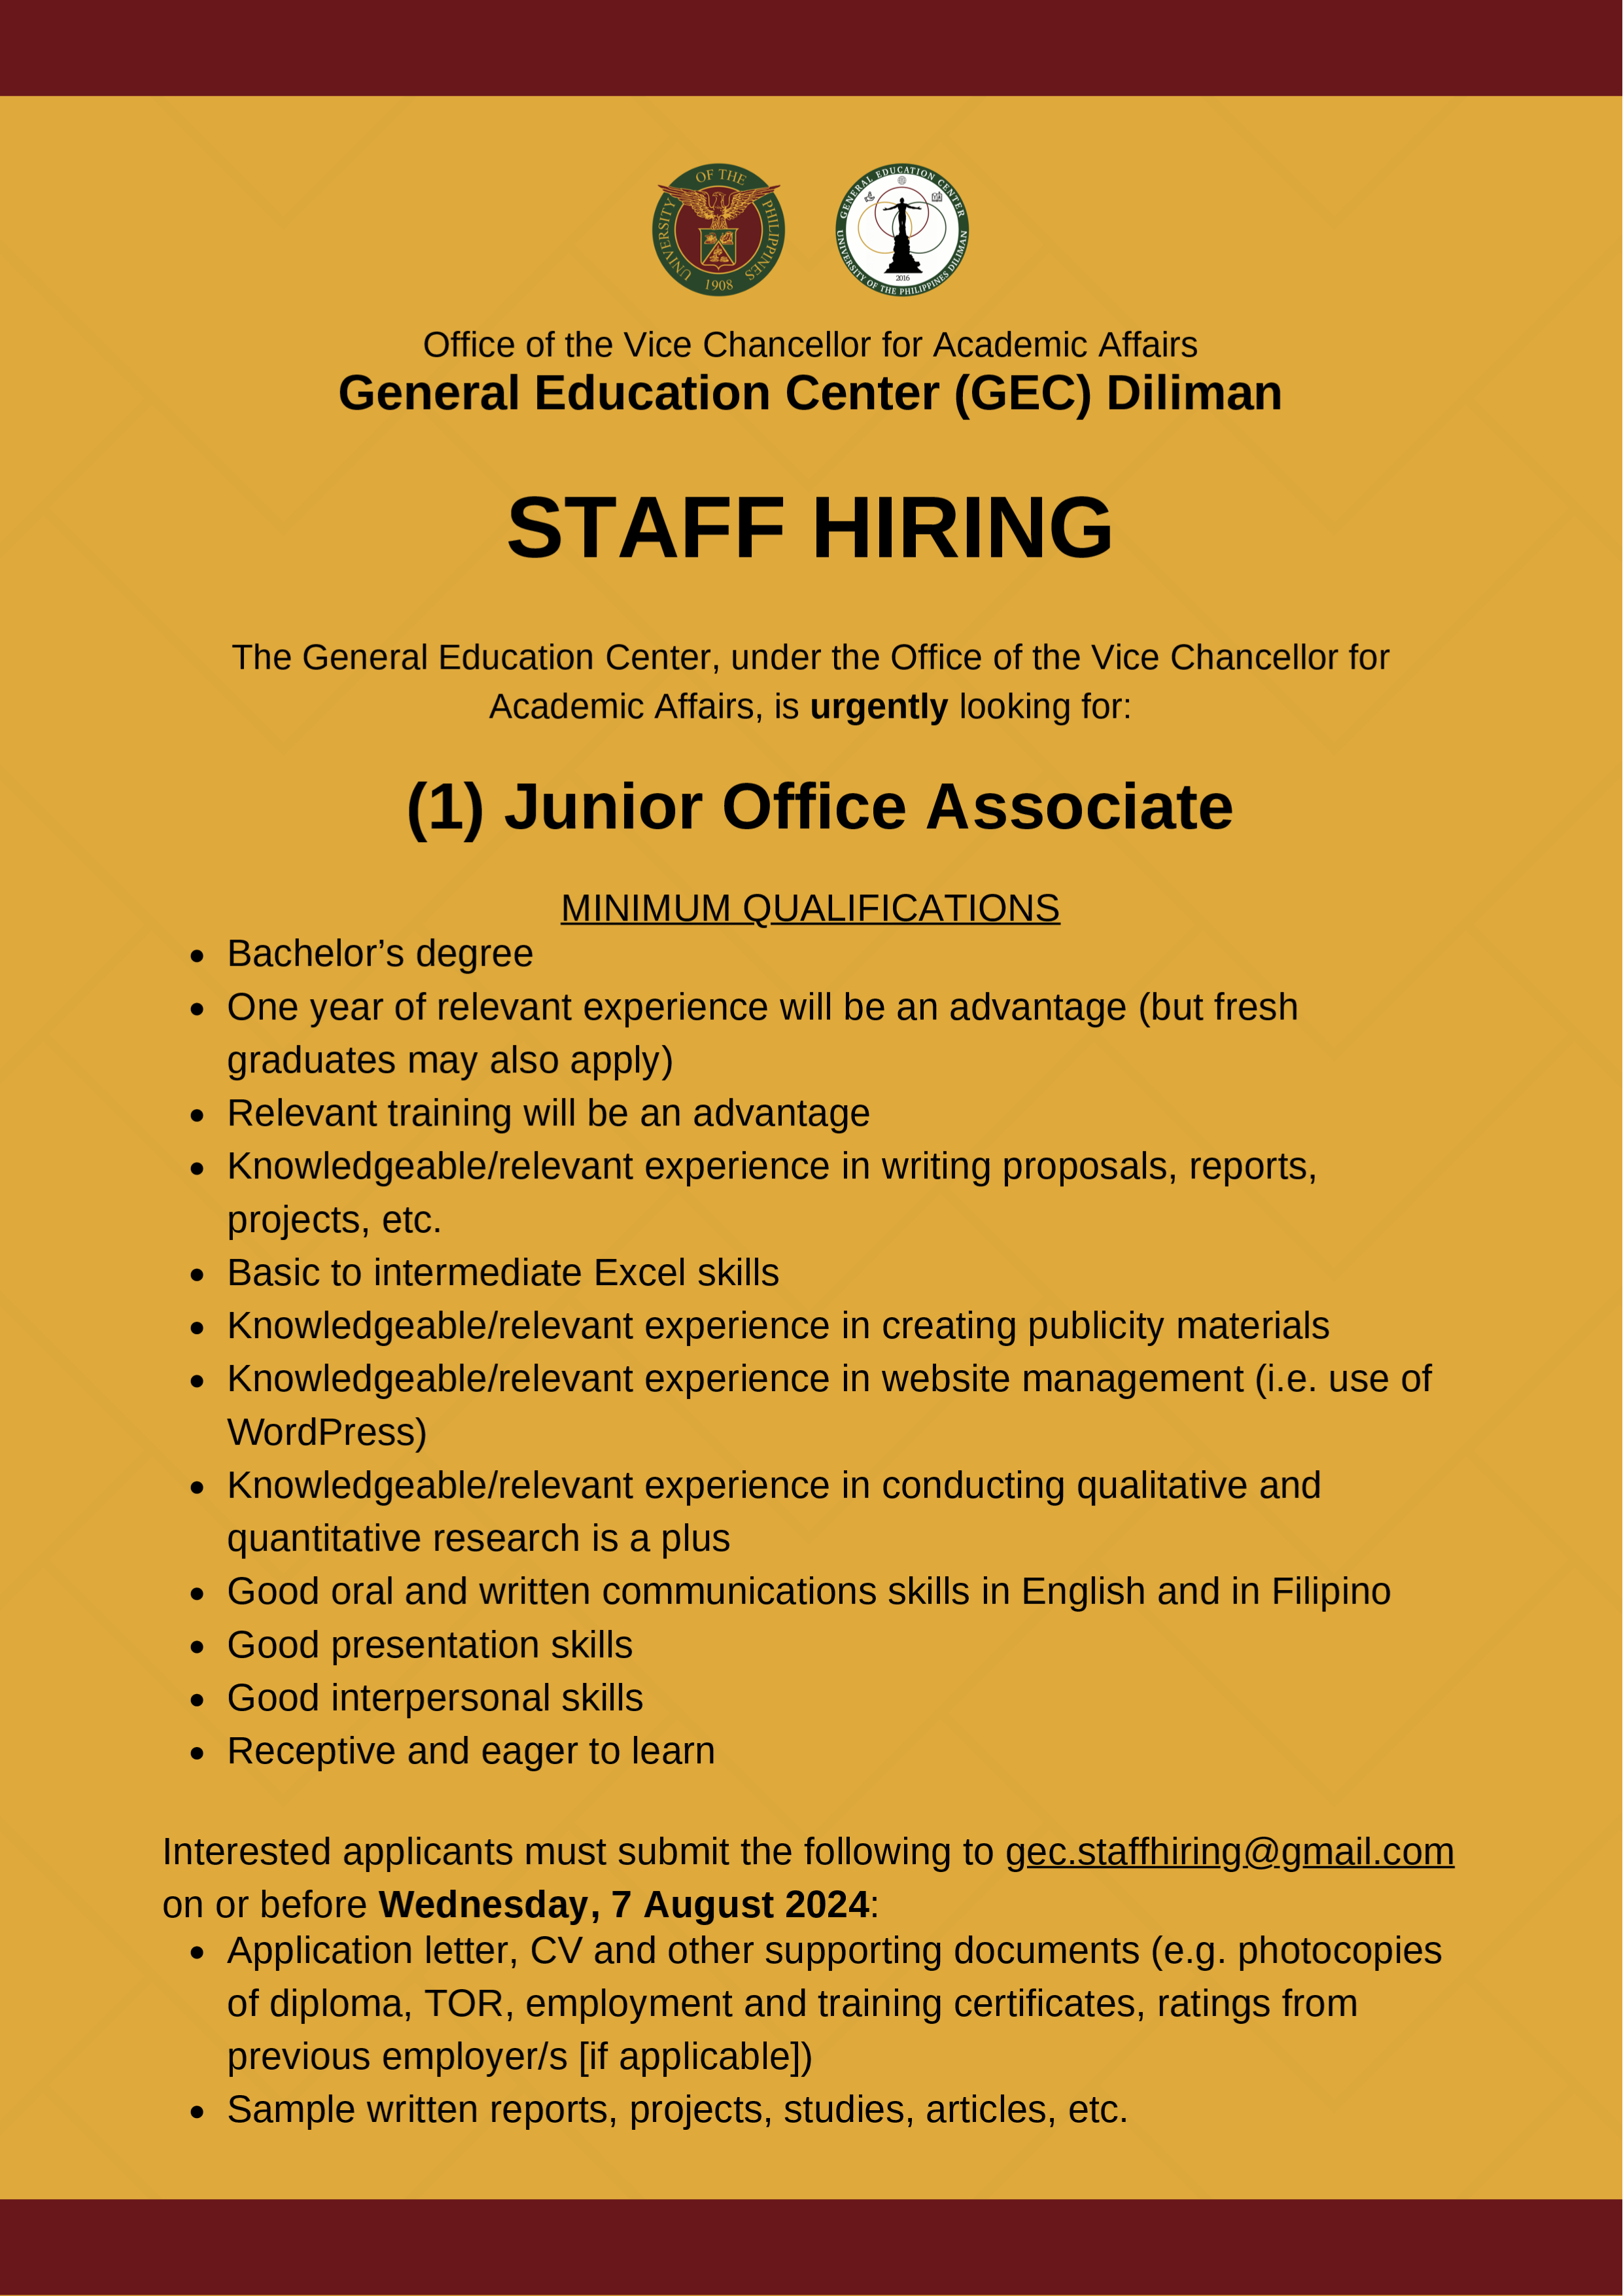 General Education Center-Diliman STAFF HIRING